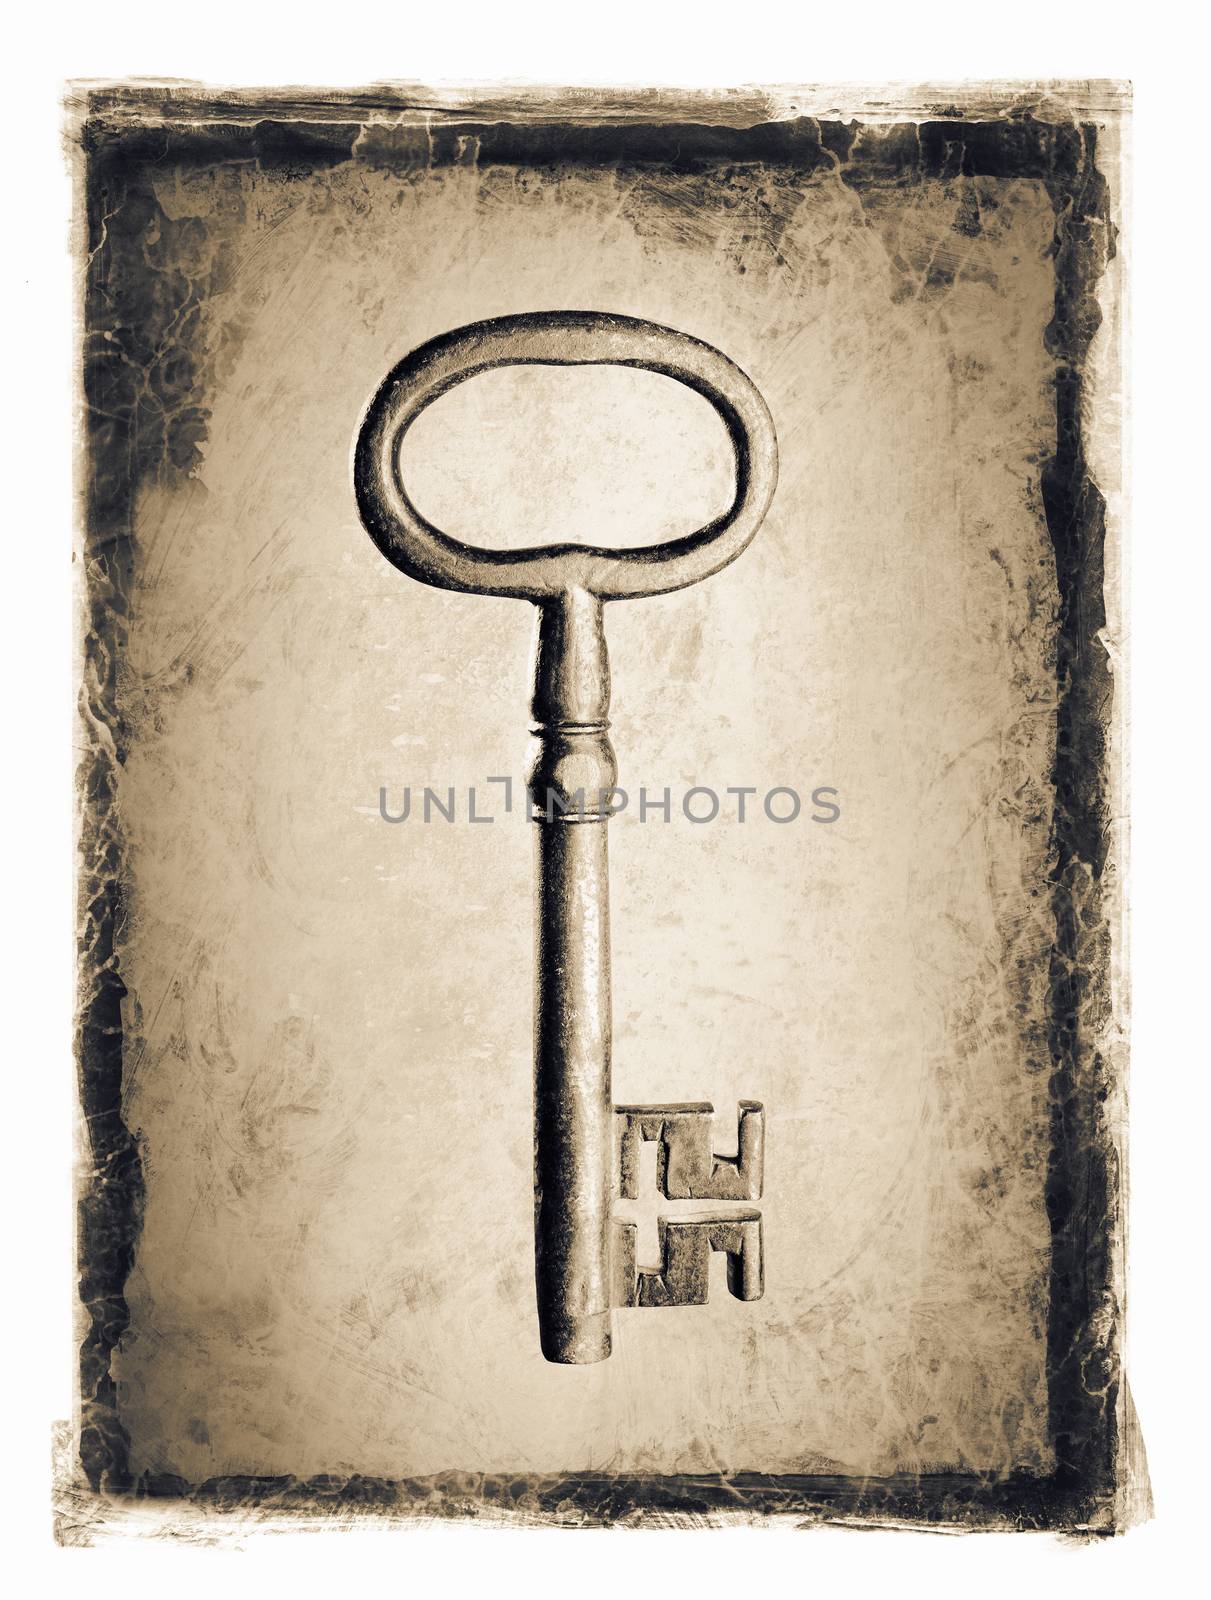 Old key ion a grunge distressed frame.